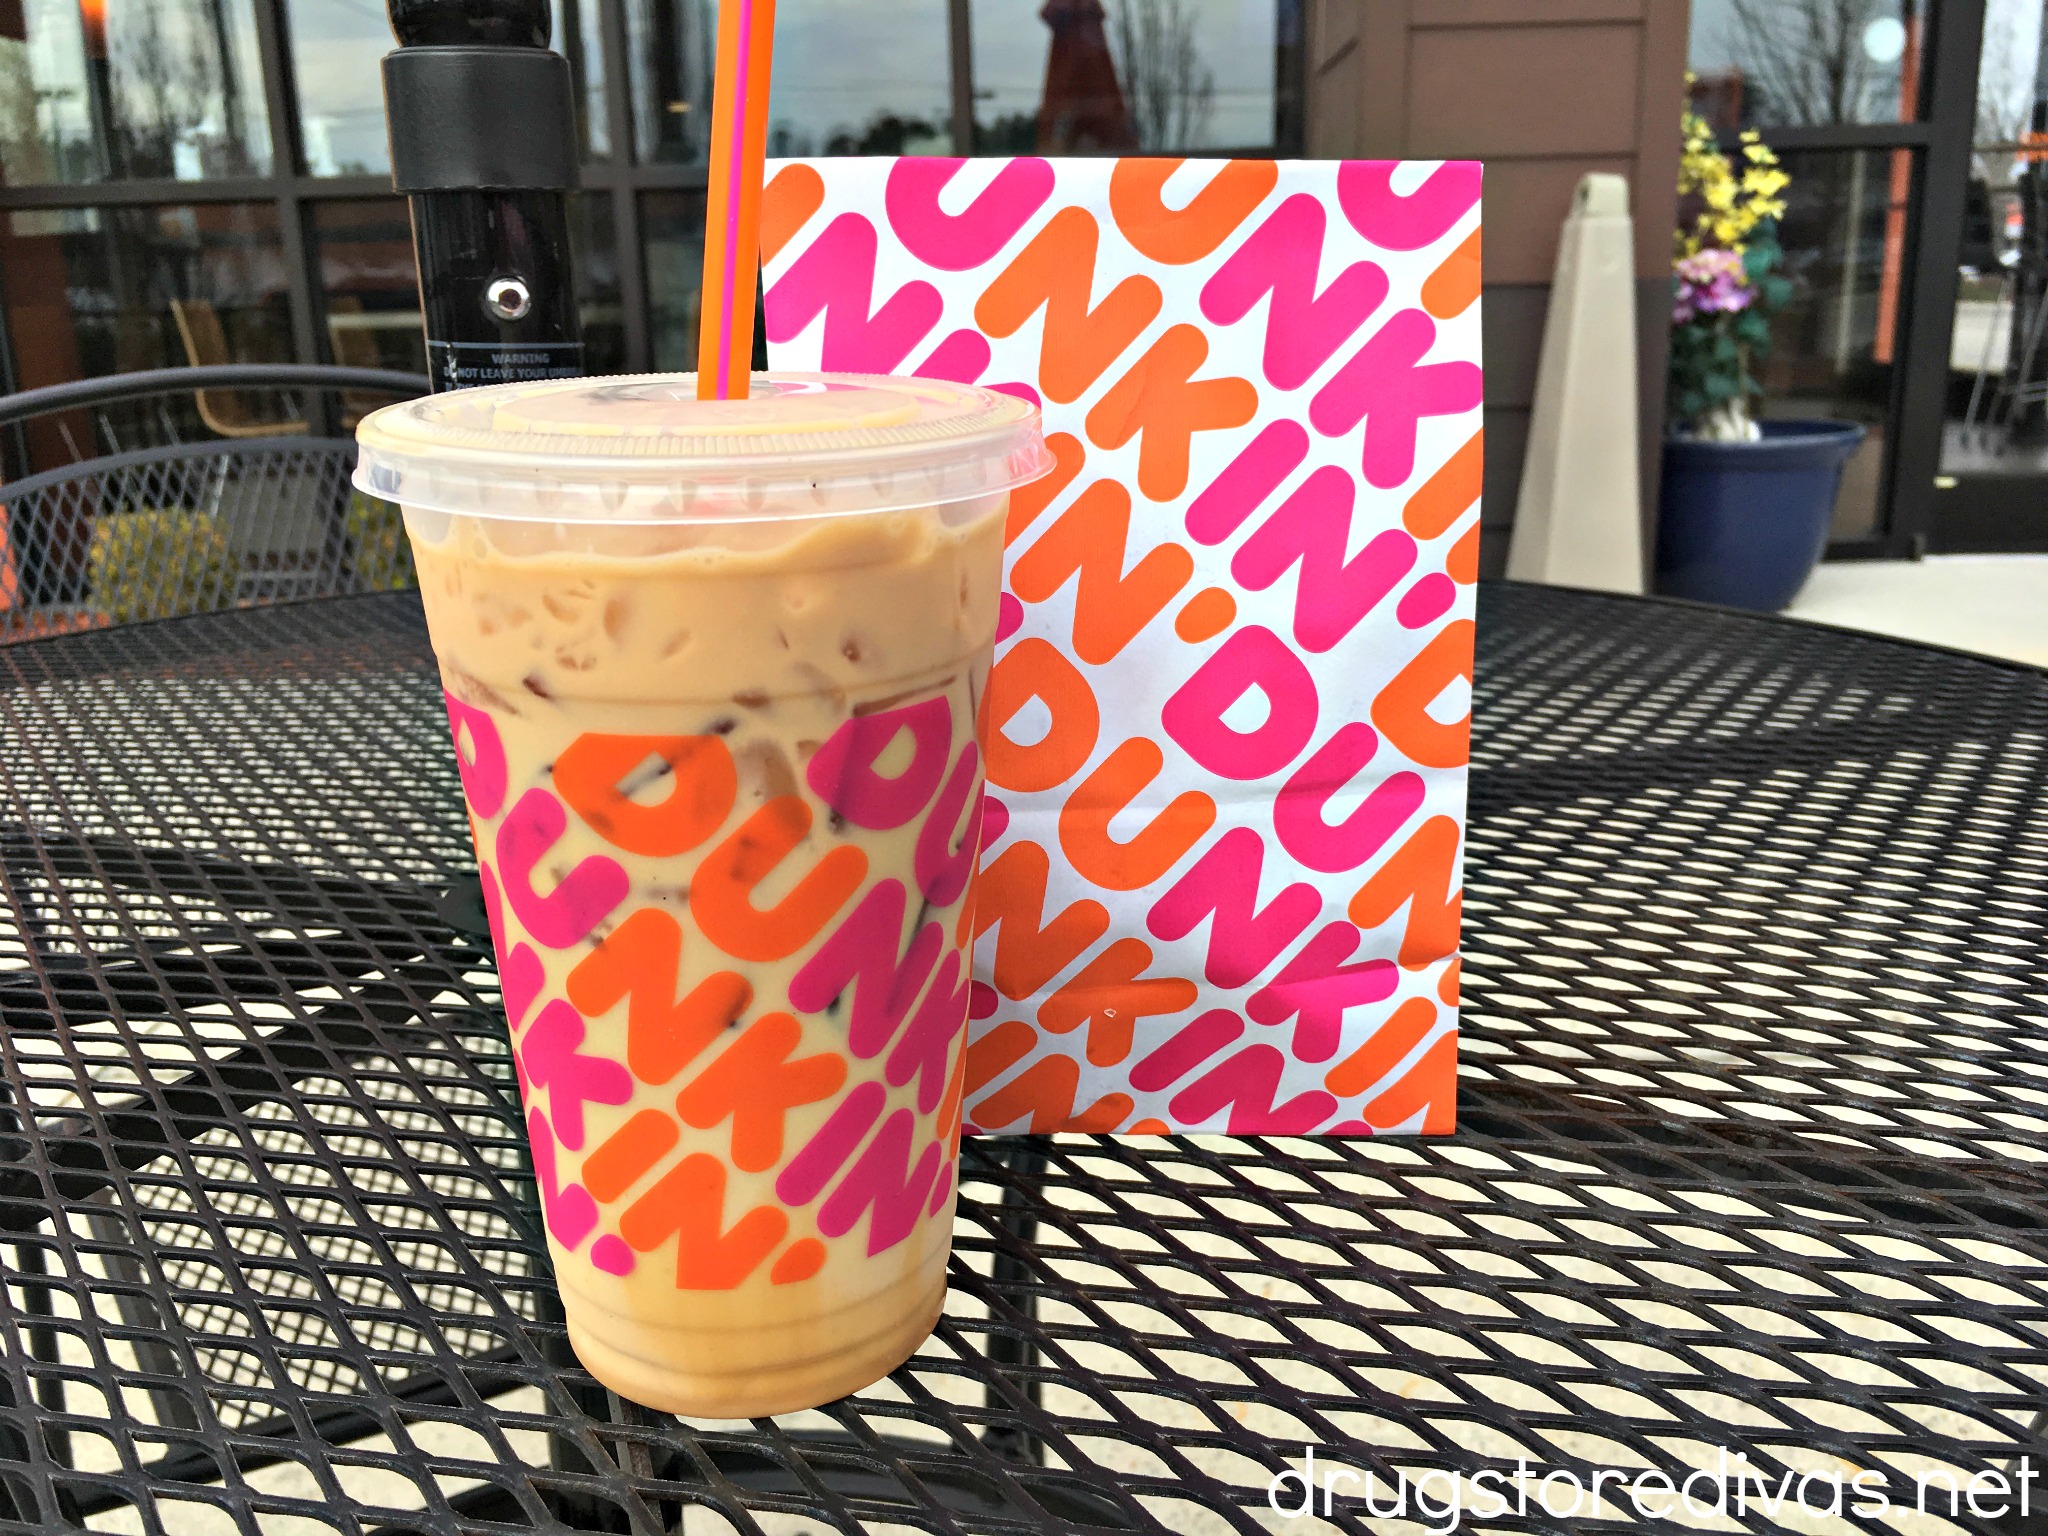 Coffee and a bag from Dunkin on a table.